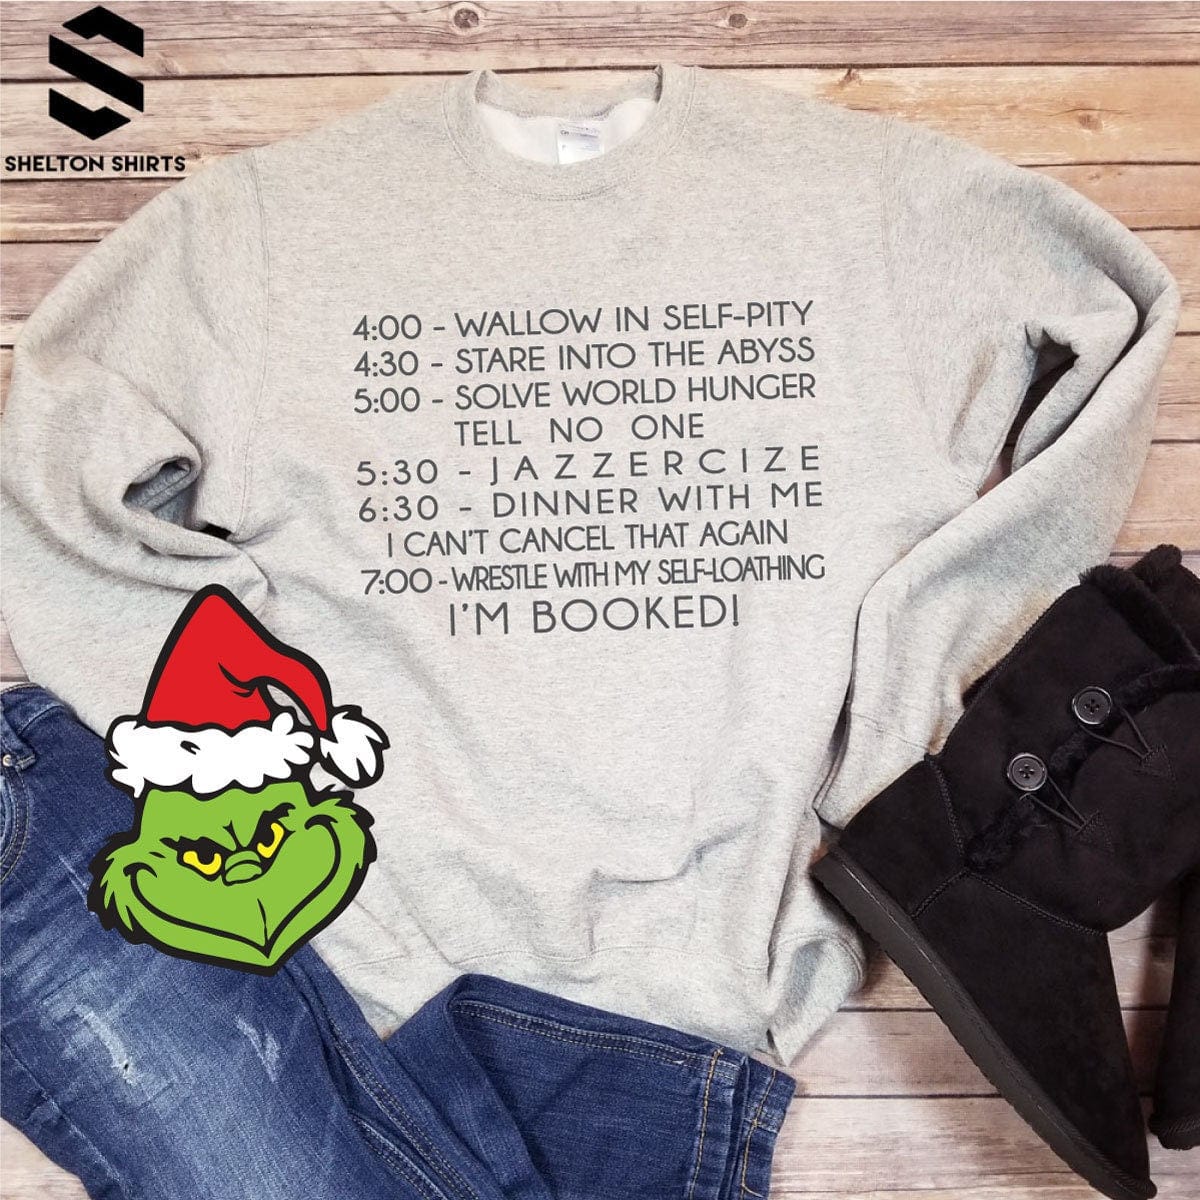 4:00 Wallow in Self Pity Daily Routine The Grinch Quote Crew Neck Heather Grey Unisex Sweatshirt Shelton Shirts